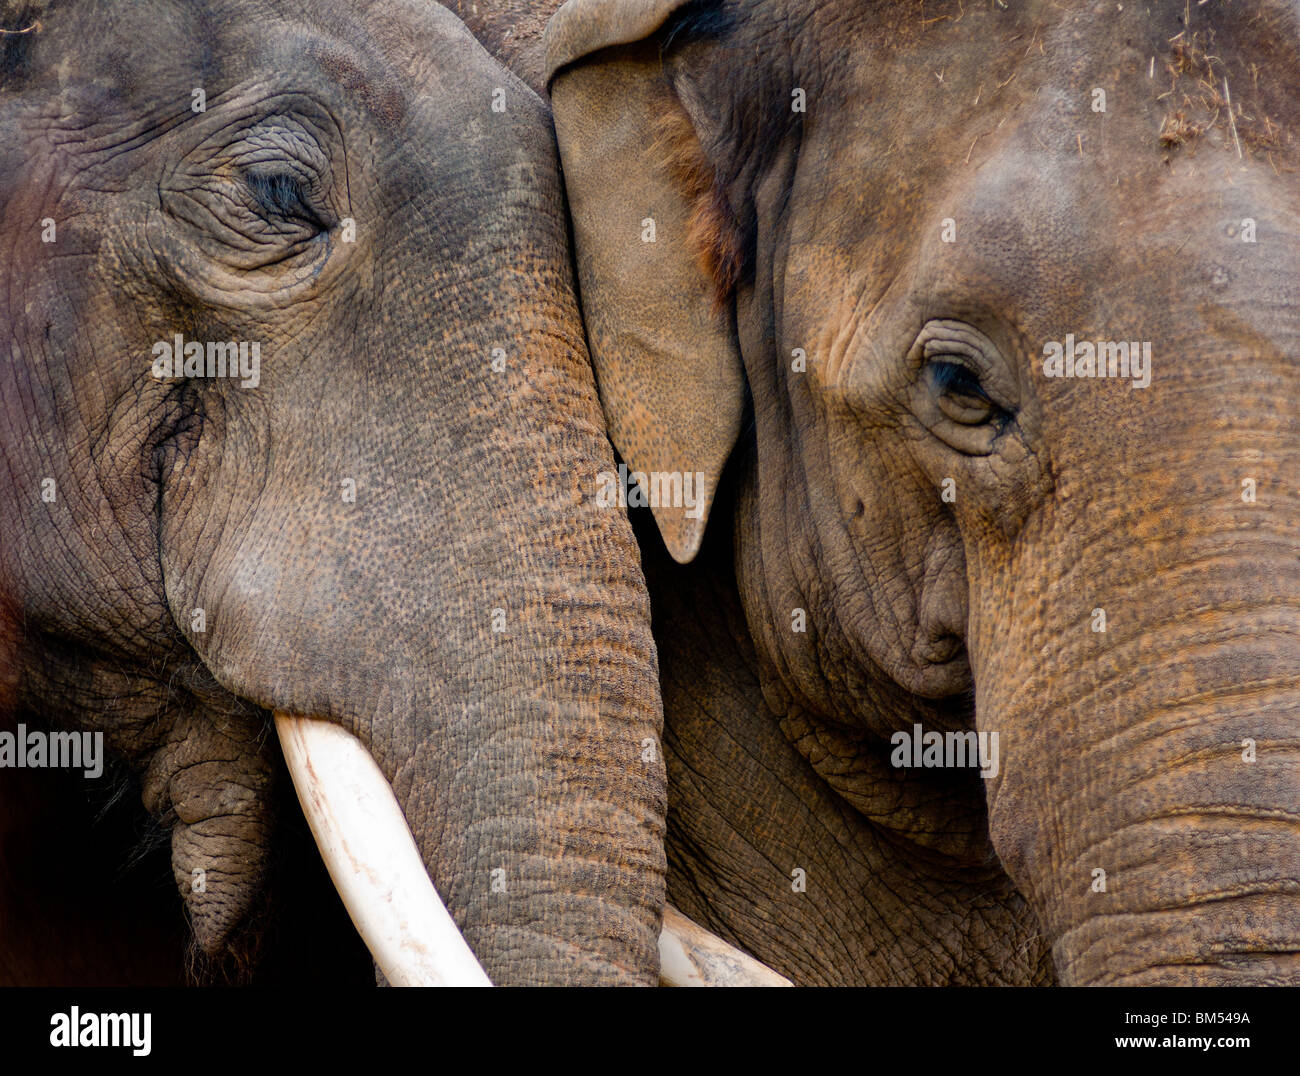 Love. Male shows affection to female elephant Stock Photo